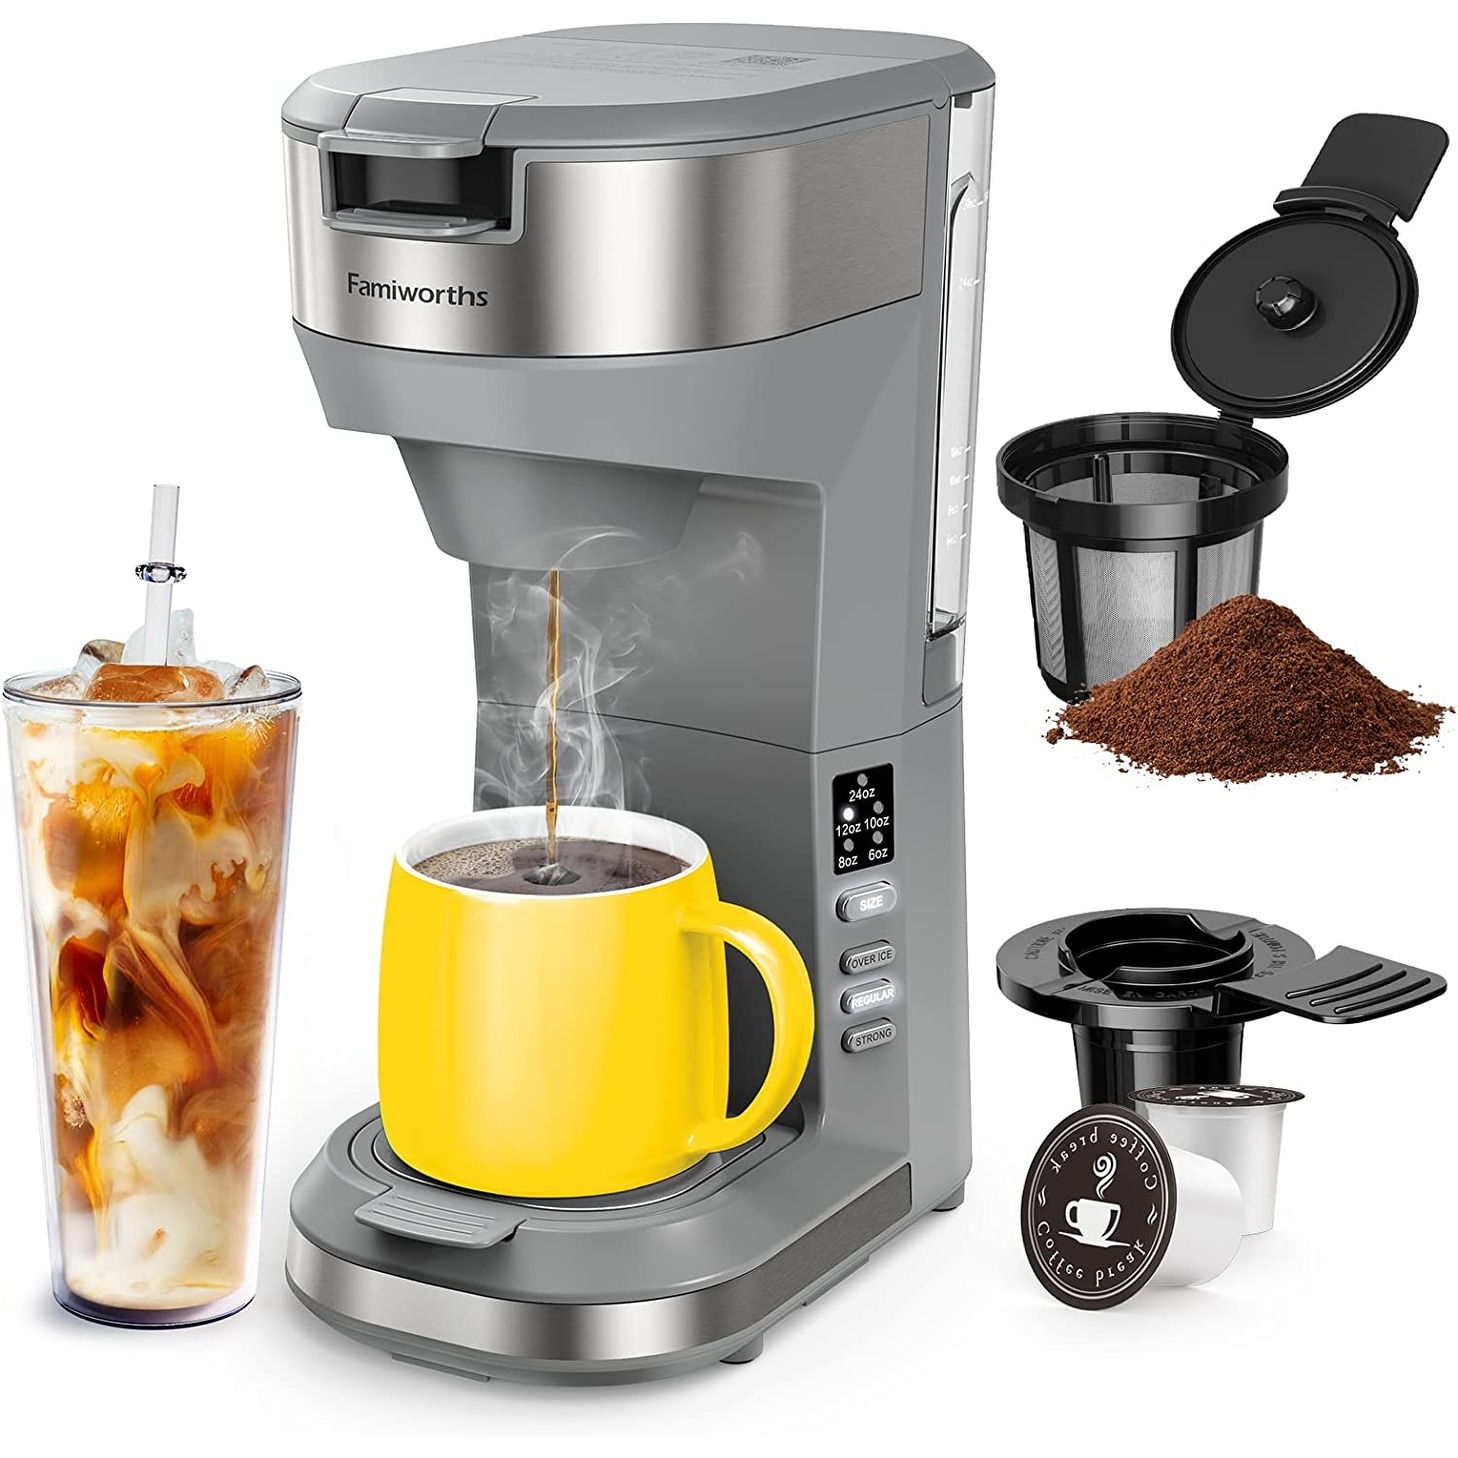 https://ak1.ostkcdn.com/images/products/is/images/direct/db07feb474cc8a7dbd4b016fcbde7fa01042747b/Hot-and-Iced-Coffee-Maker-for-K-Cups-and-Ground-Coffee%2C-4-5-Cups-Coffee-Maker-and-Single-serve-Brewers.jpg